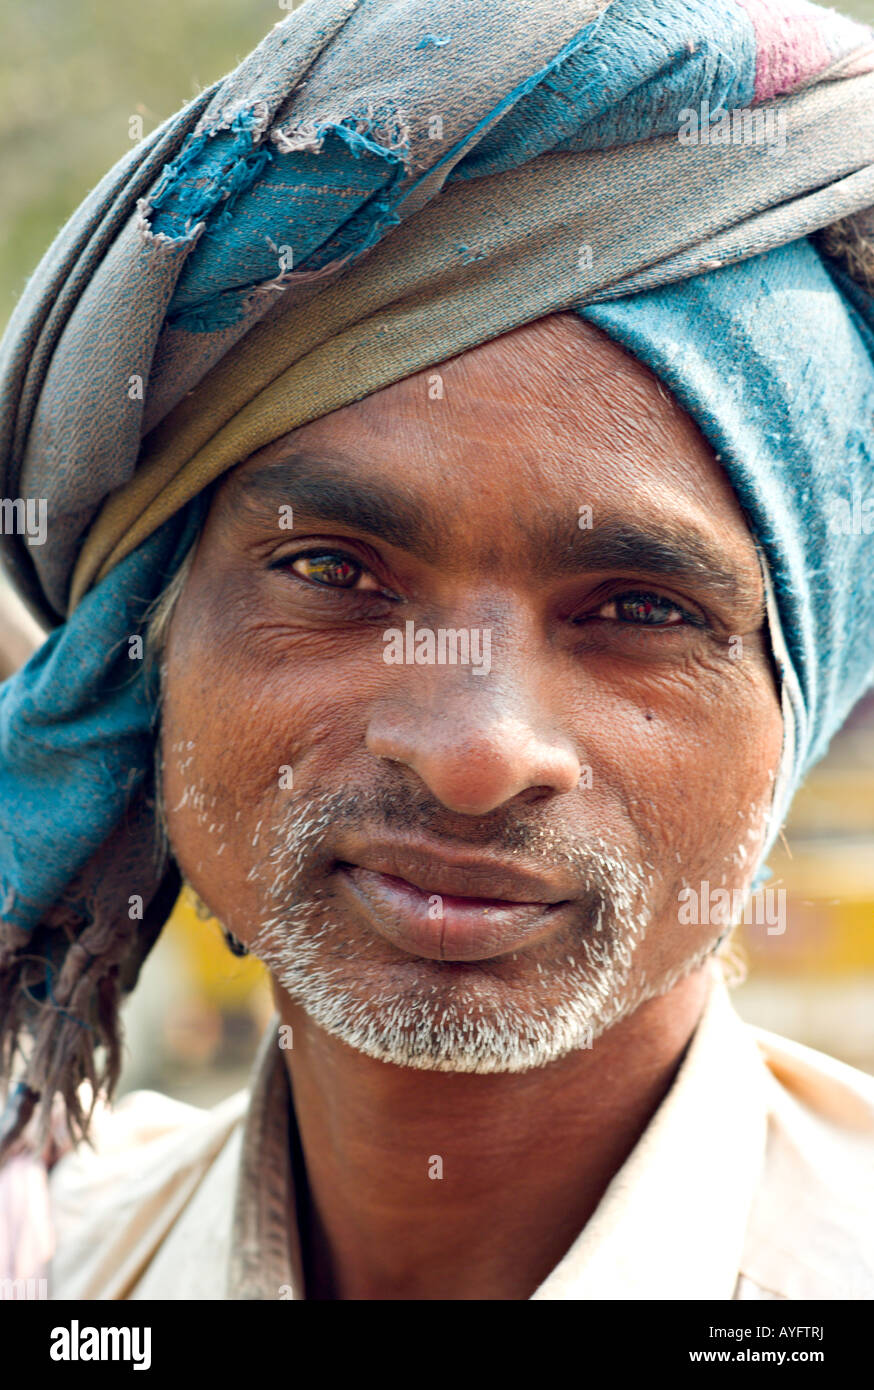 INDIA NEW DELHI Portrait of homeless man wearing a tattered blue turban and living on the streets of New Delhi Stock Photo